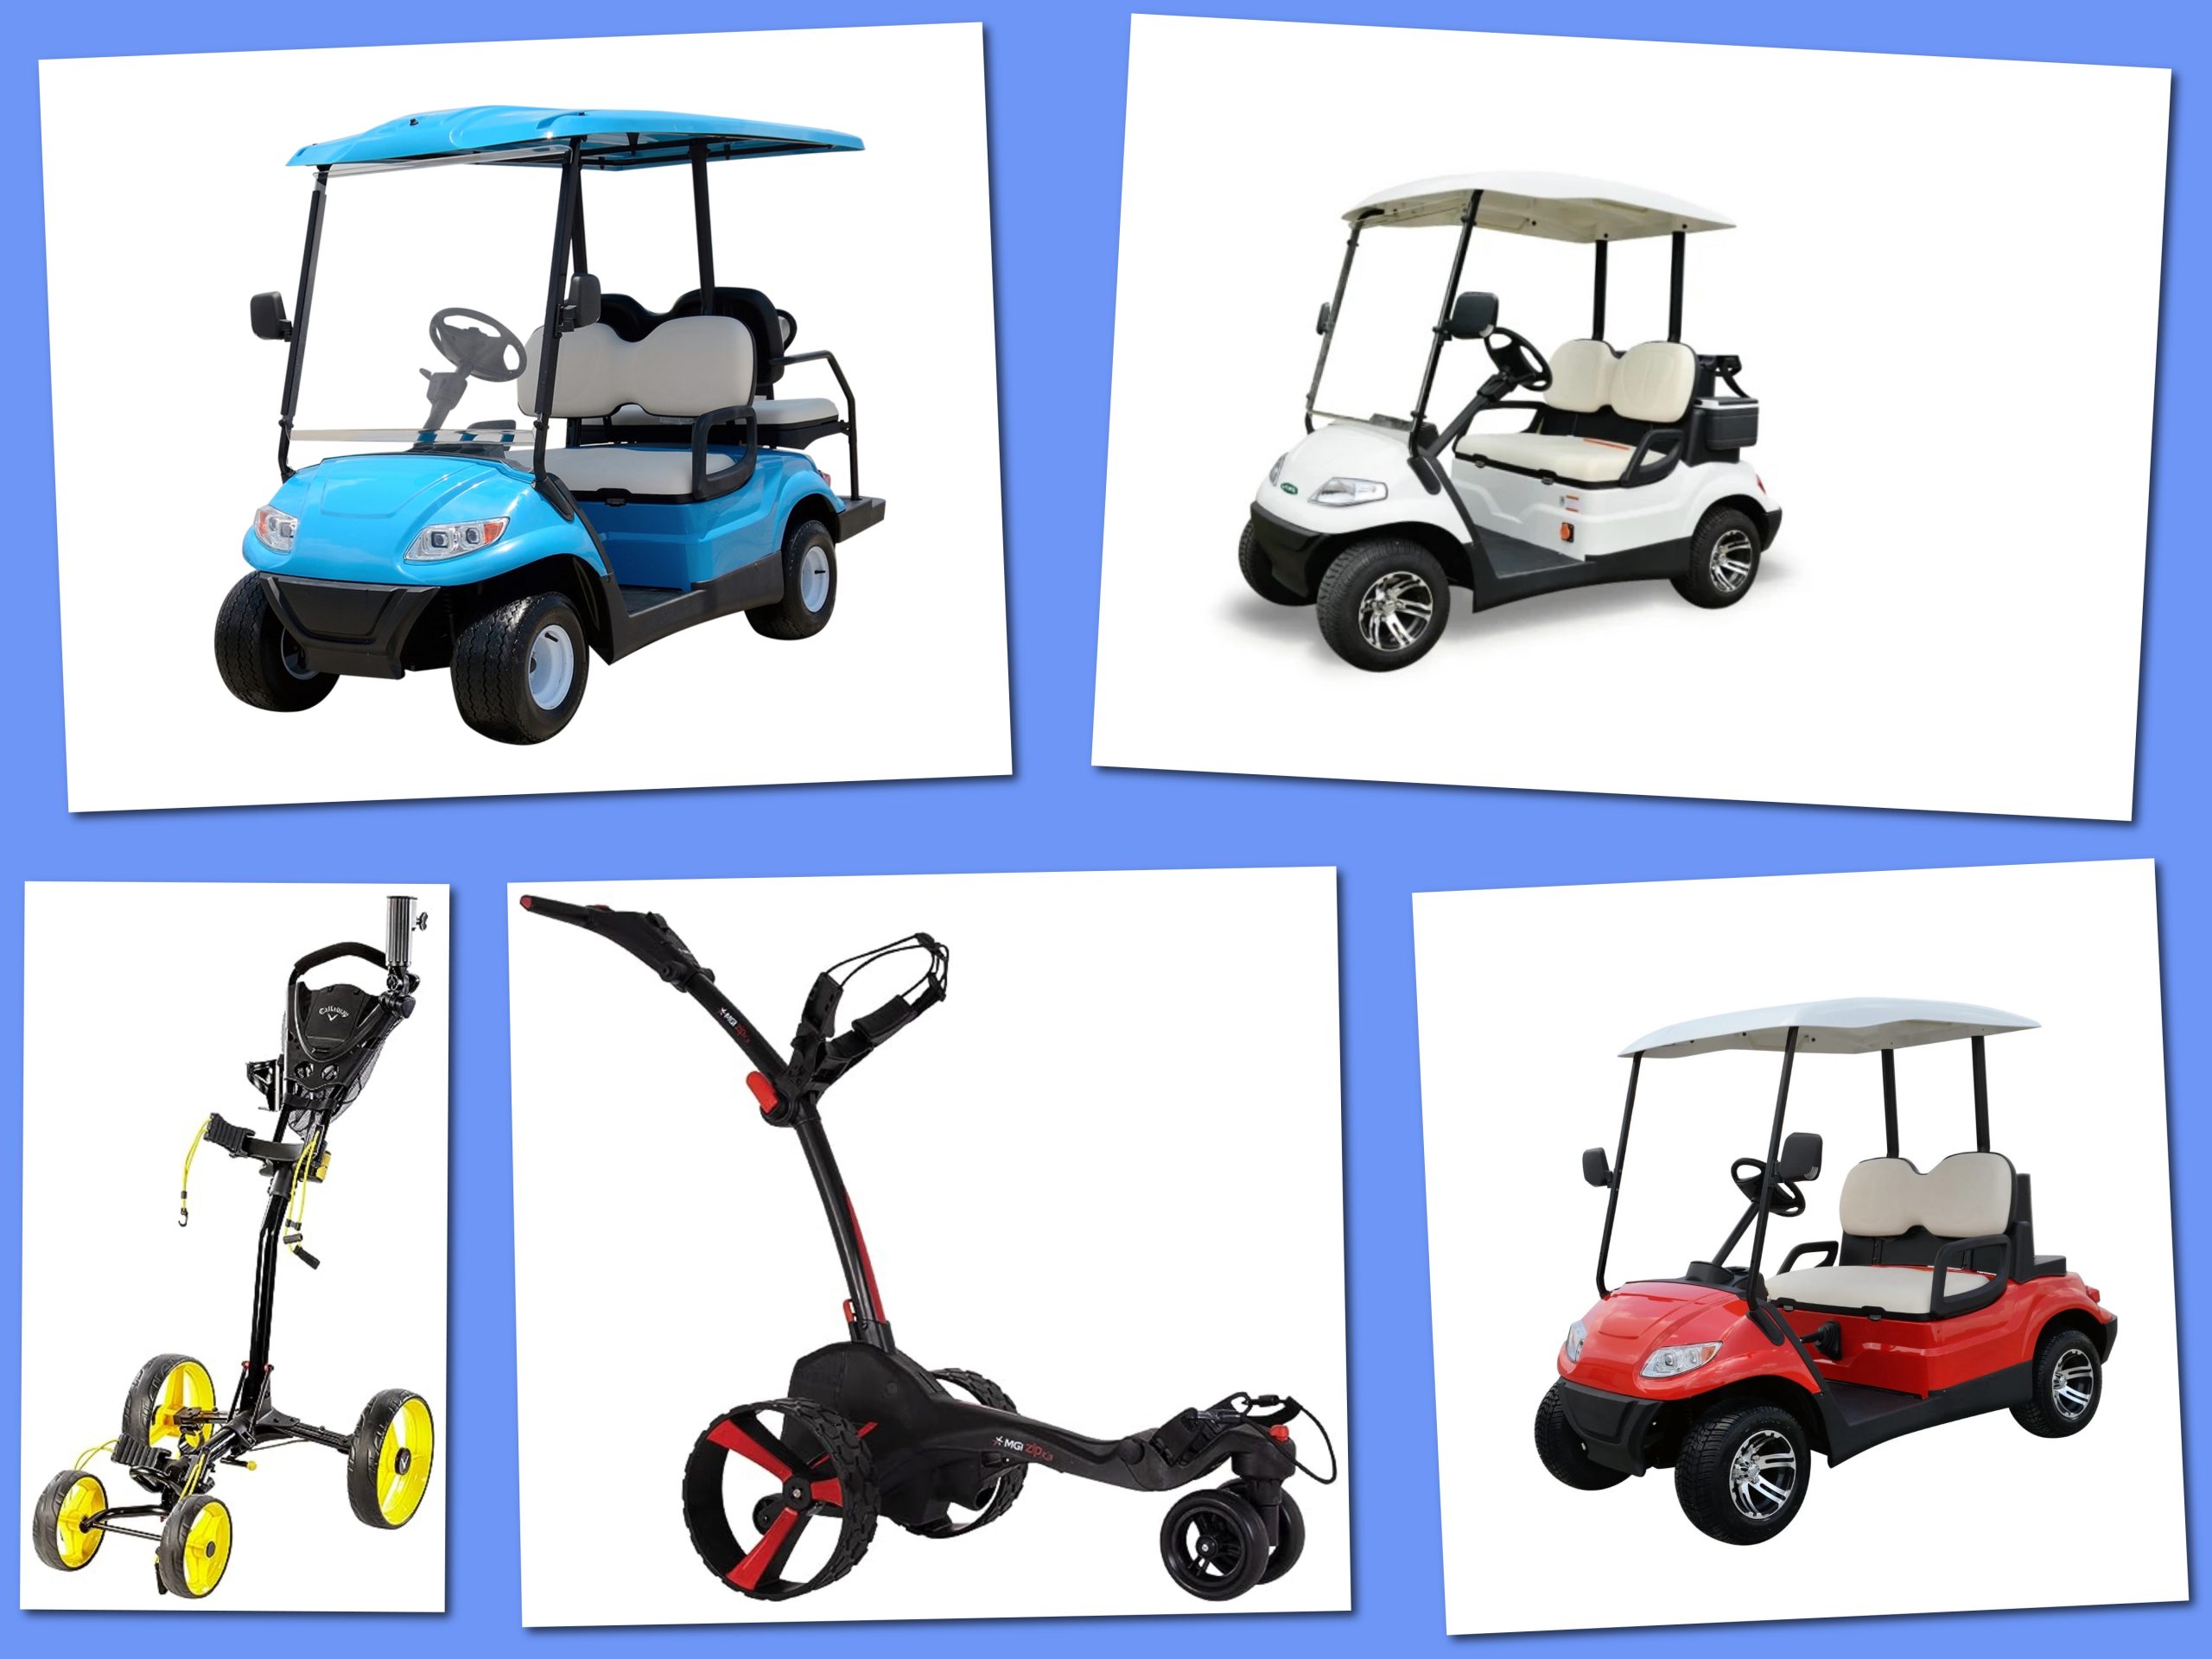 Best Golf Cart Buying Guide